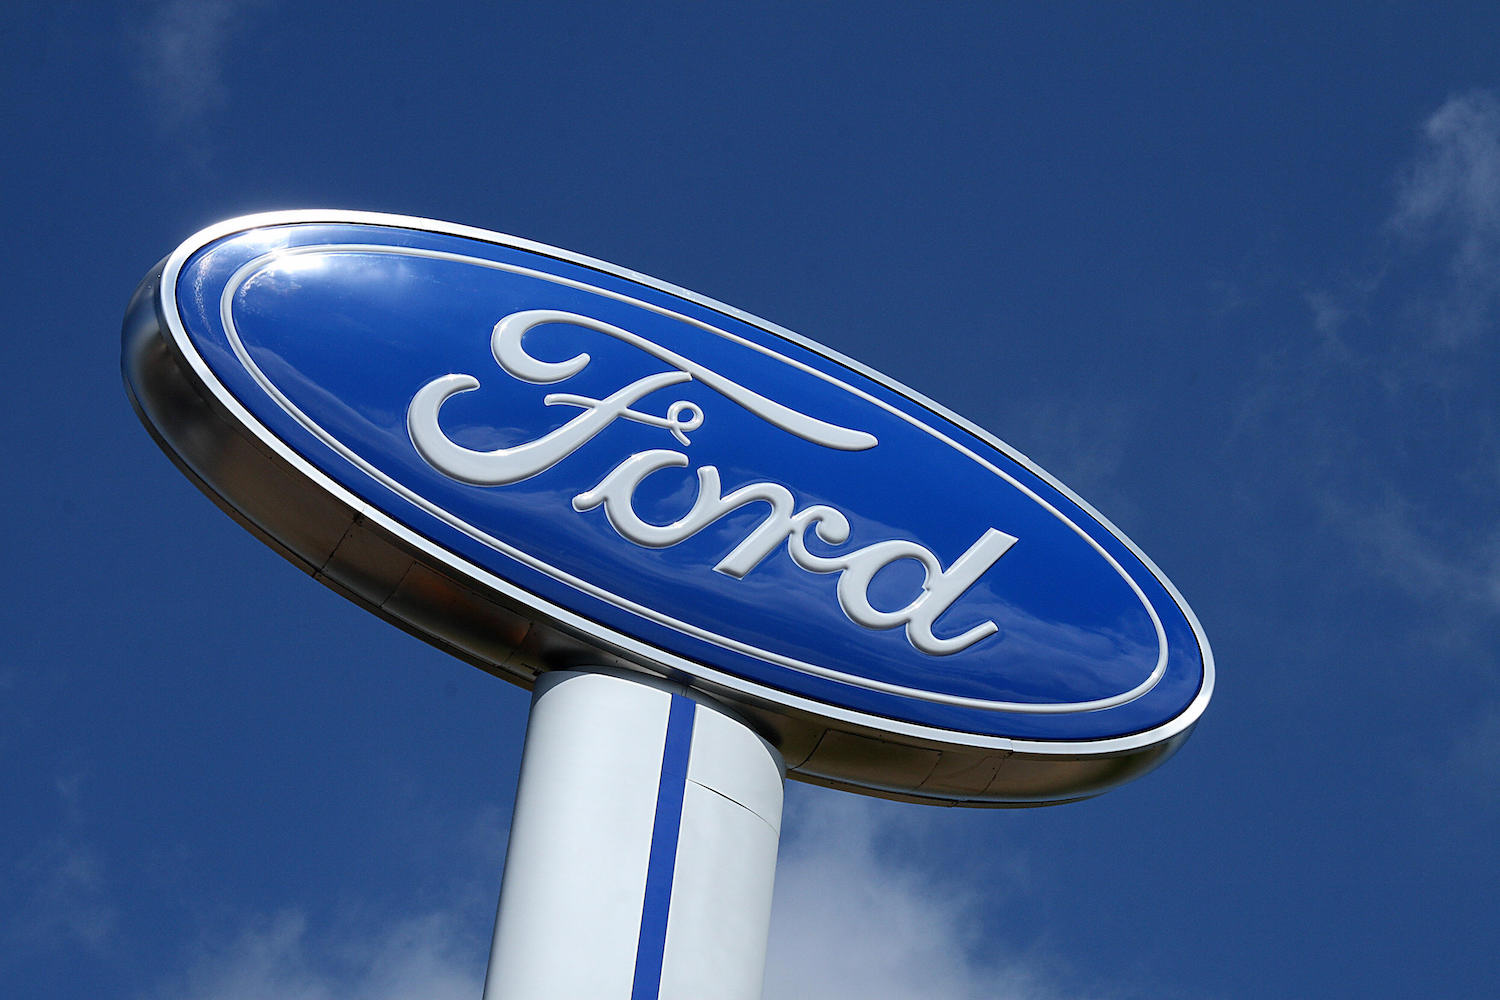 The blue Ford logo as it appears on a large sign above a dealership, the sky visible in the background.